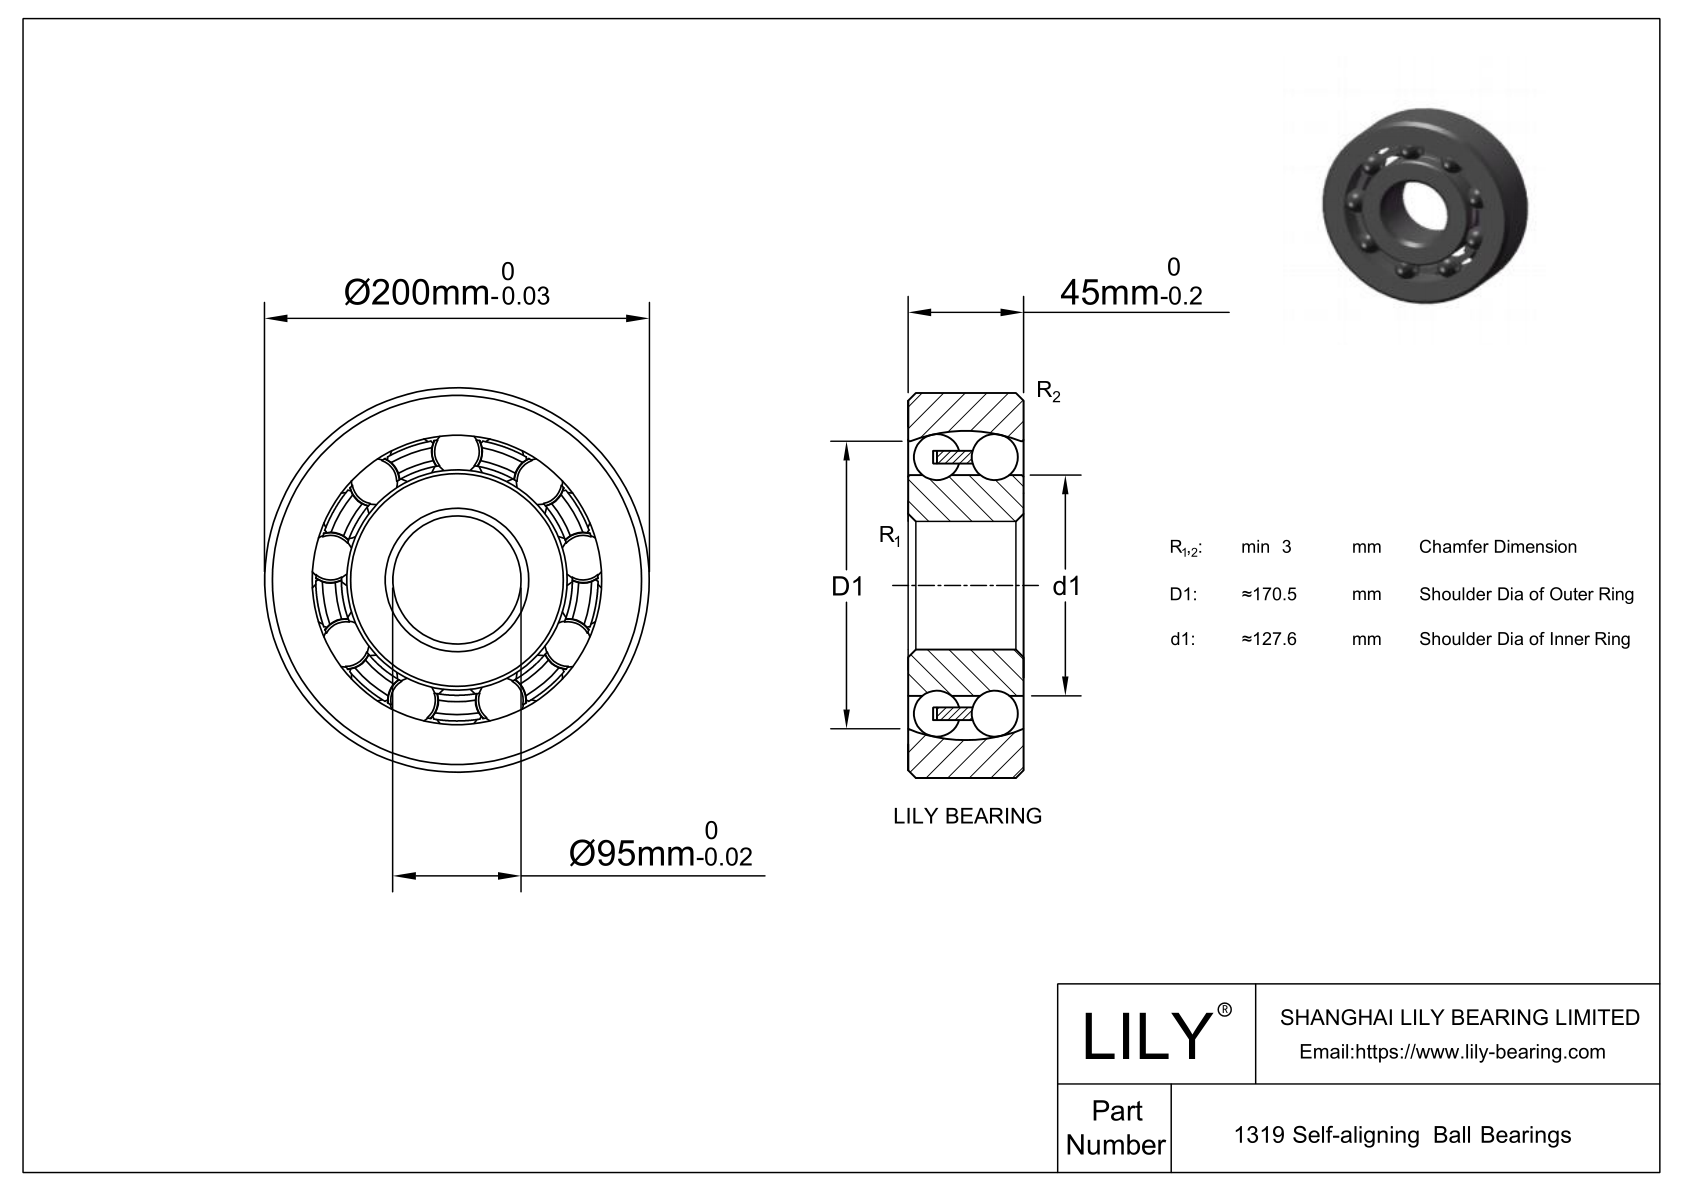 S1319 Stainless Steel Self Aligning Ball Bearings cad drawing